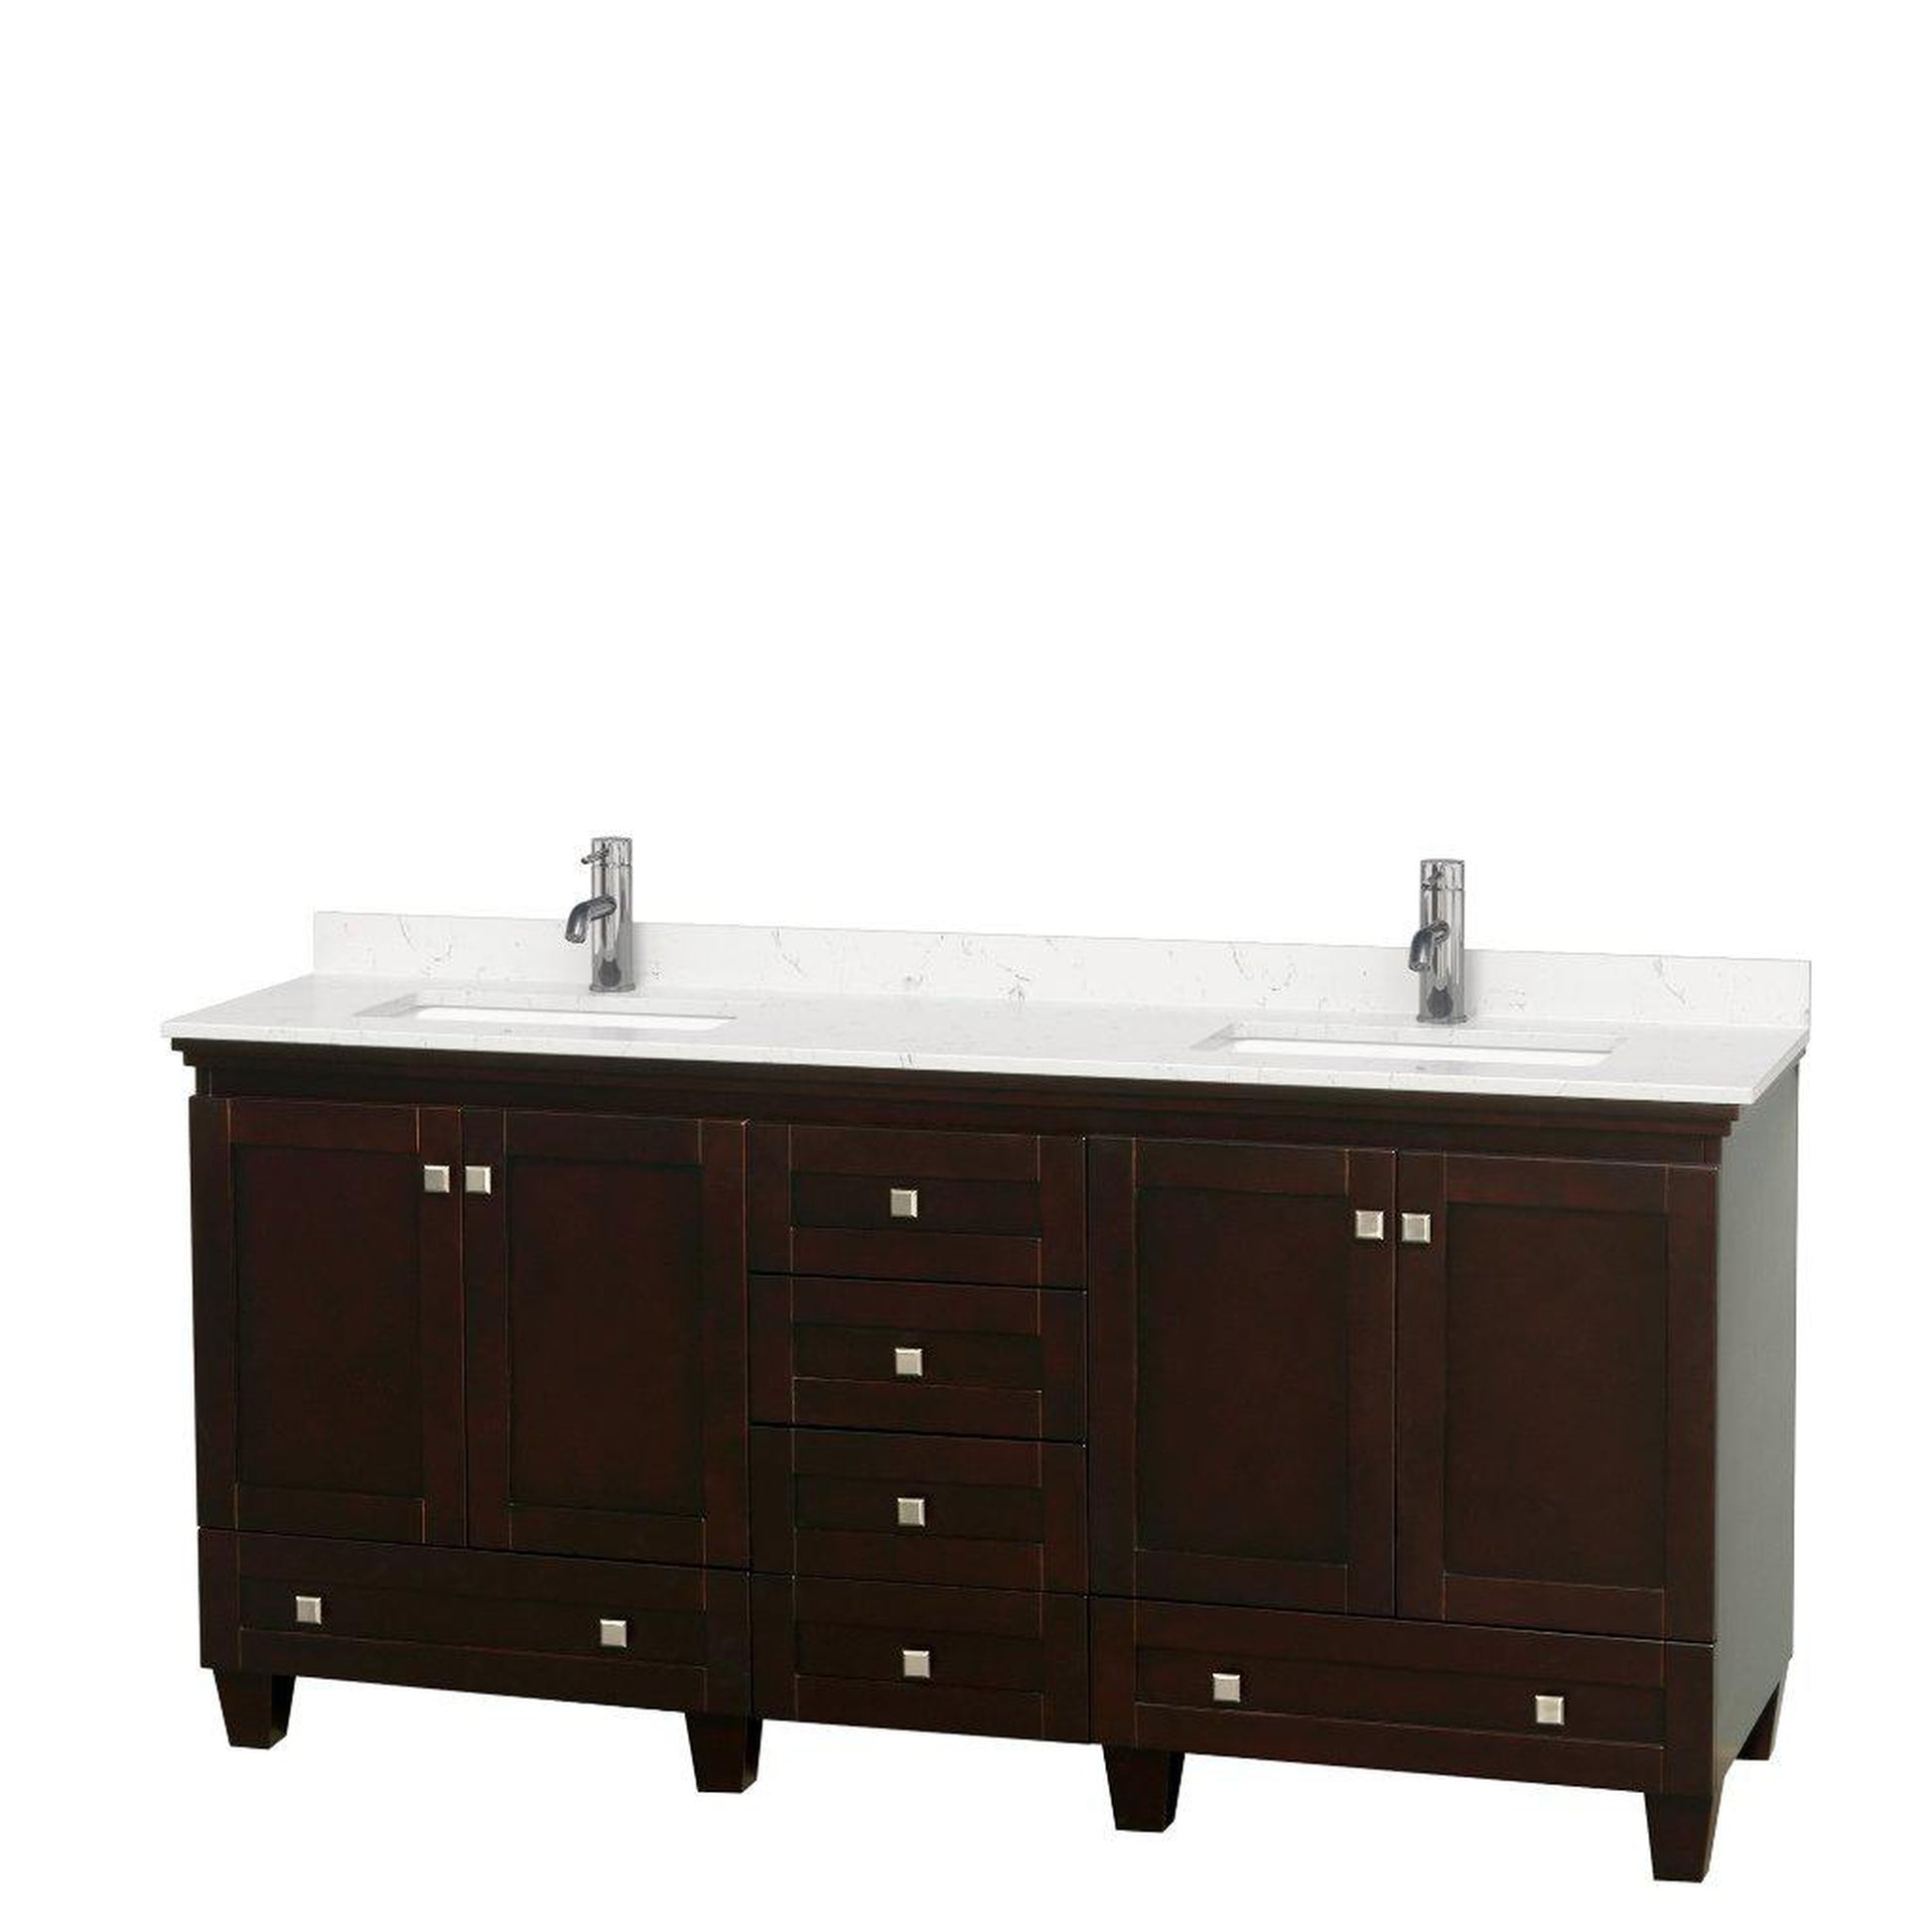 Wyndham Collection Acclaim 72" Double Bathroom Espresso Vanity With Light-Vein Carrara Cultured Marble Countertop And Undermount Square Sinks